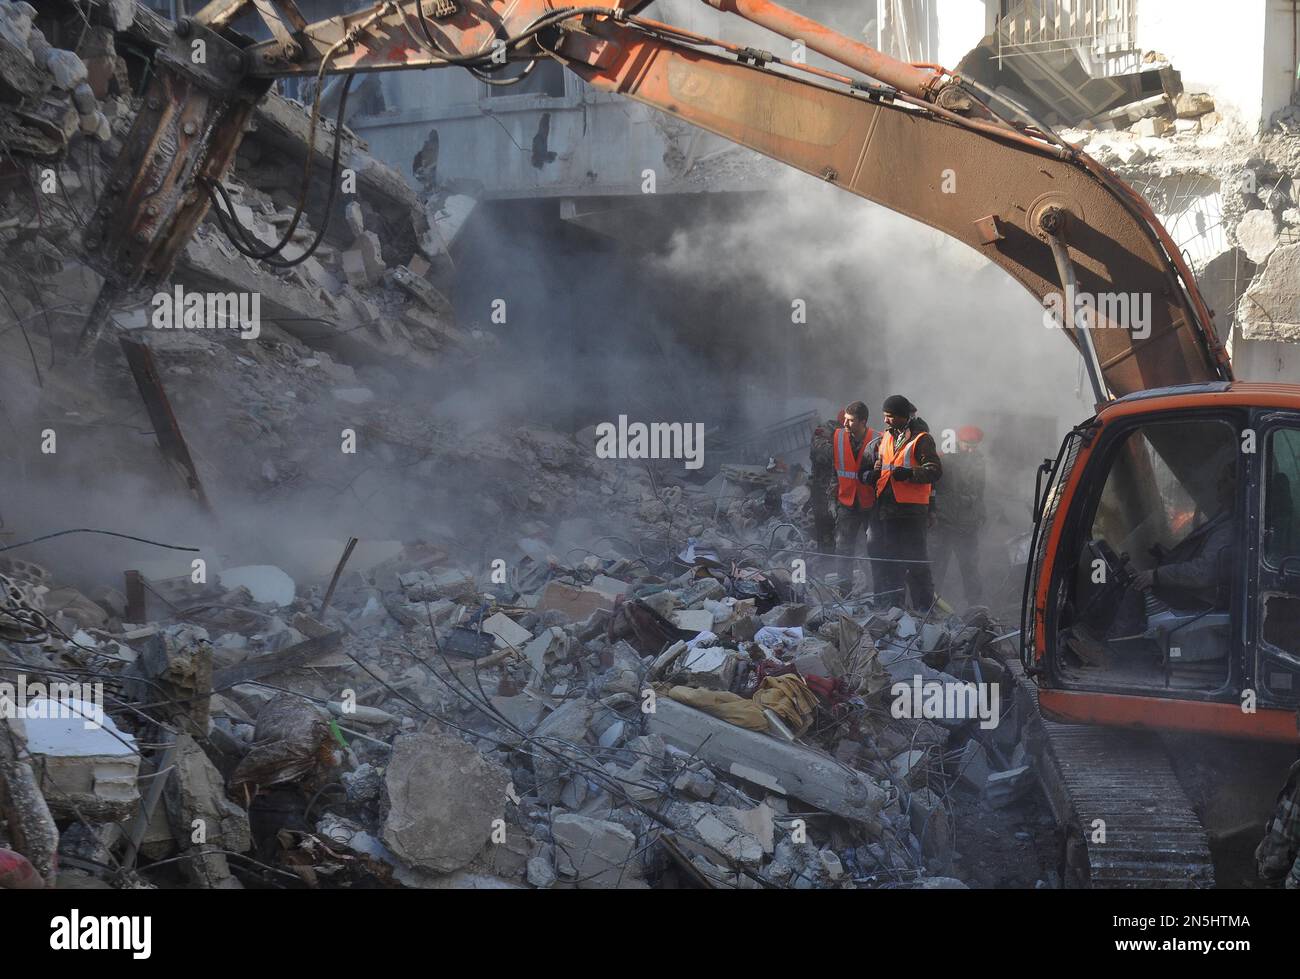 Ankara/Damascus. 9th Feb, 2023. Rescue workers search for survivors among the rubble of a damaged building in the Sulaiman al-Halabi neighborhood in Aleppo city, northern Syria, on Feb. 8, 2023. Credit: Str/Xinhua/Alamy Live News Stock Photo